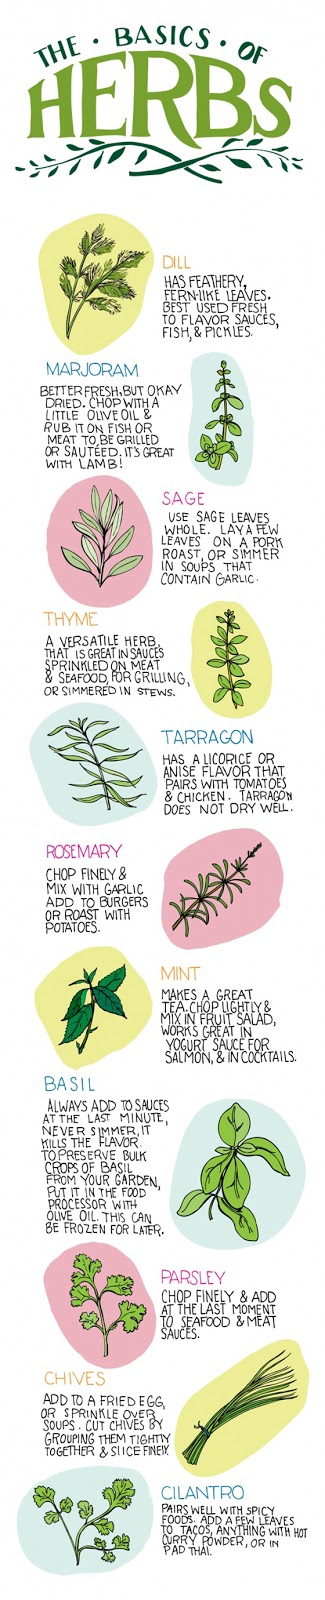 The Basic of Herbs